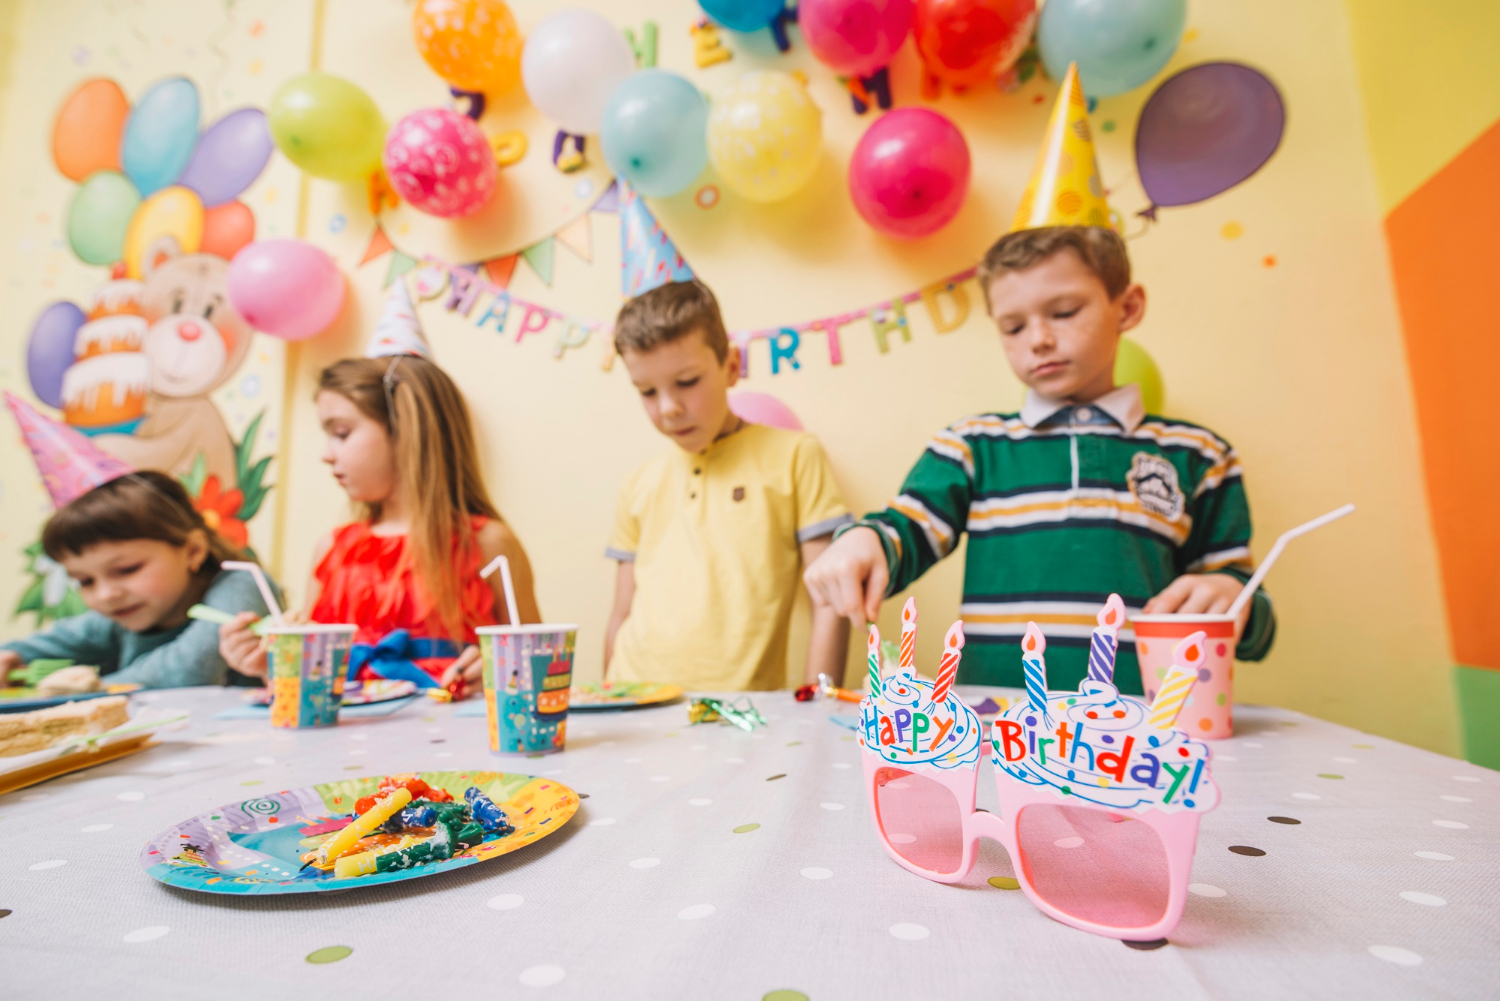 8 Amazing Venues for Birthday Party Extra Fun | Flip Out